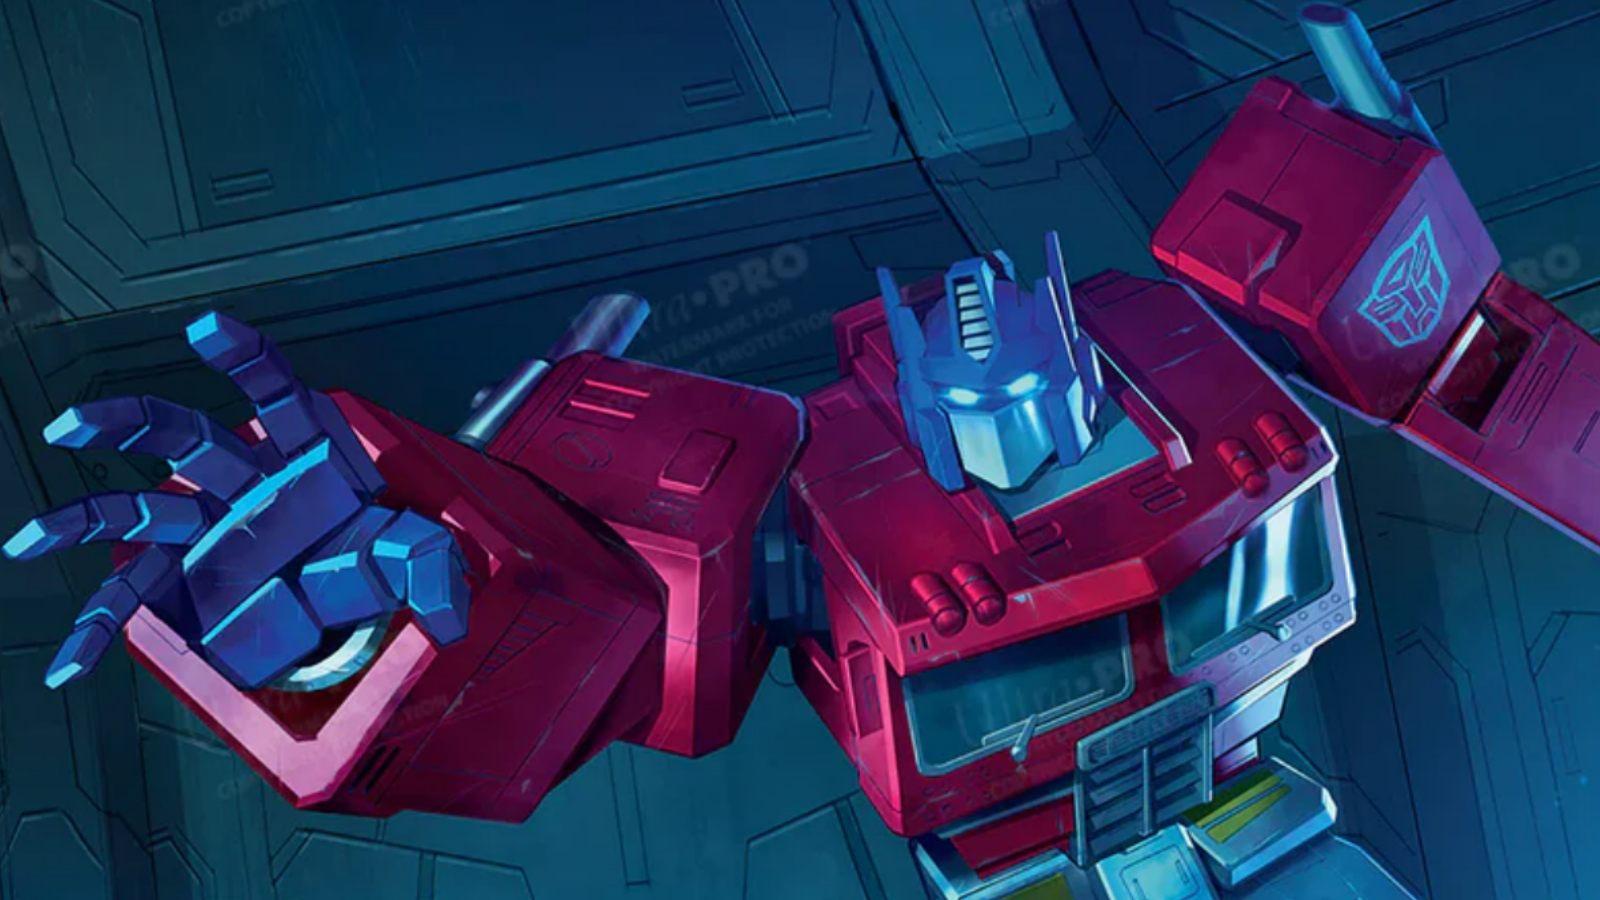 Transformers Rise of the Beasts box office: How much has it made? - Dexerto